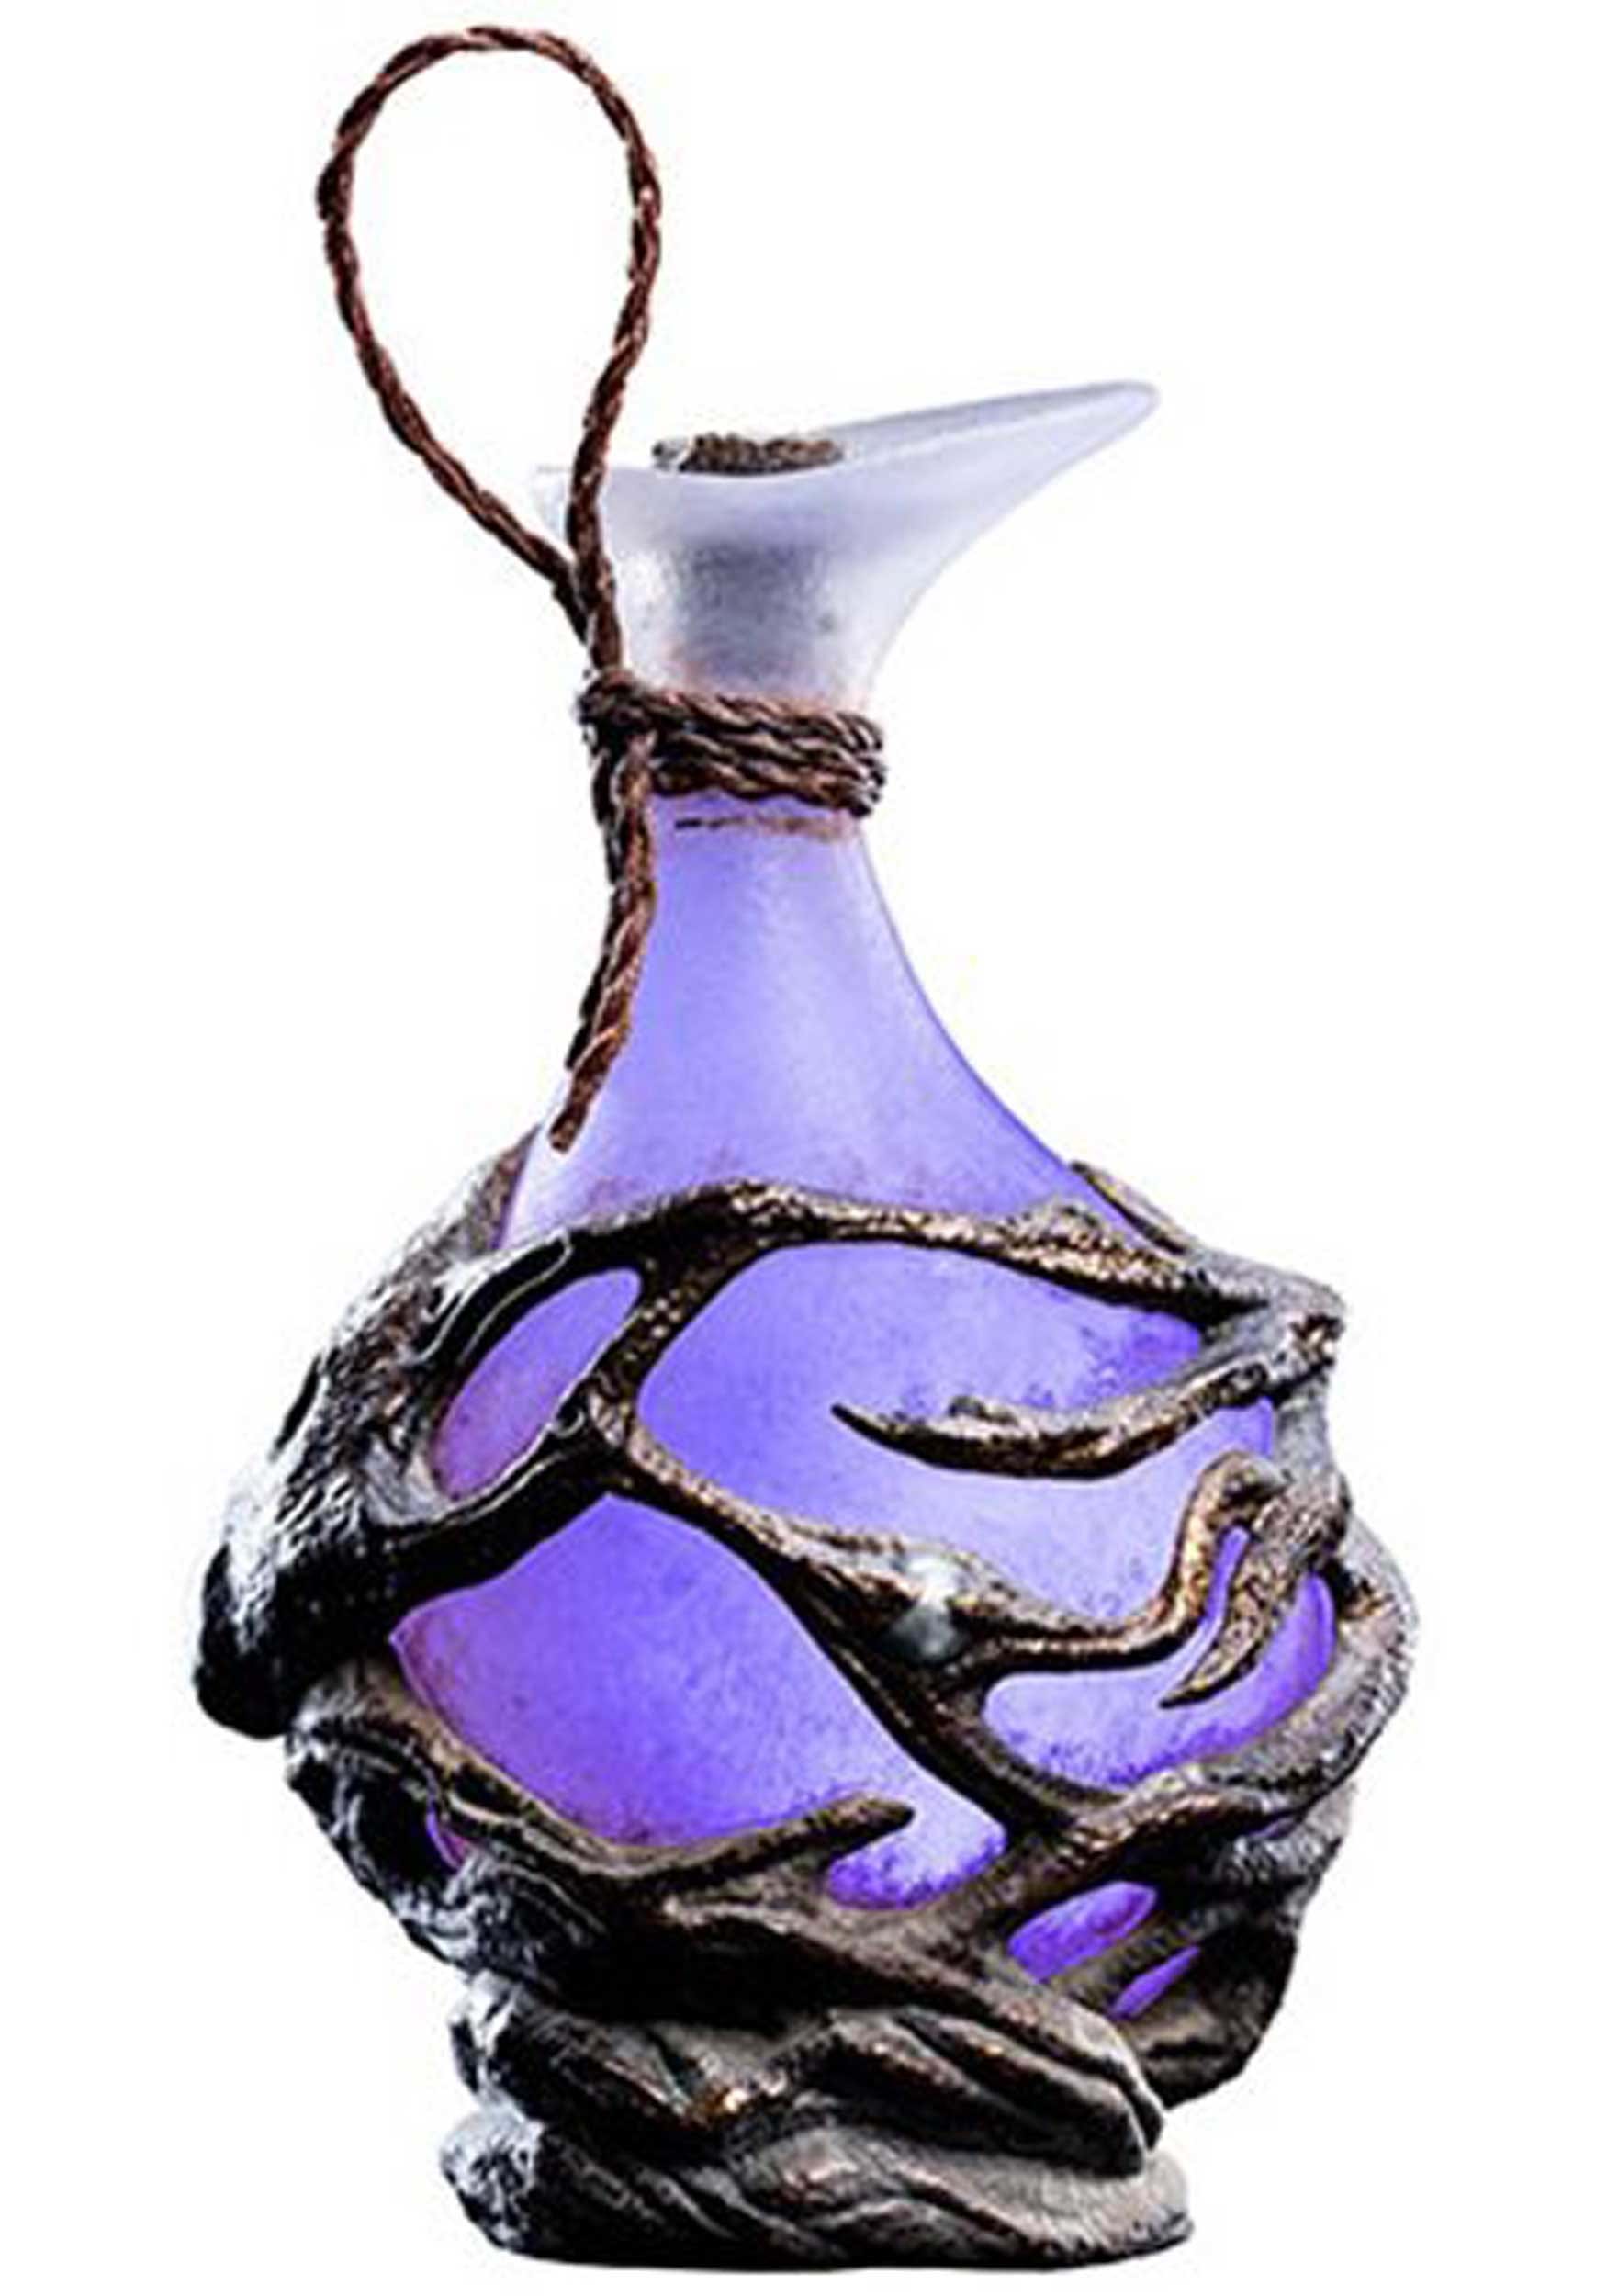 The Age of Resistance Essence Vial: The Dark Crystal